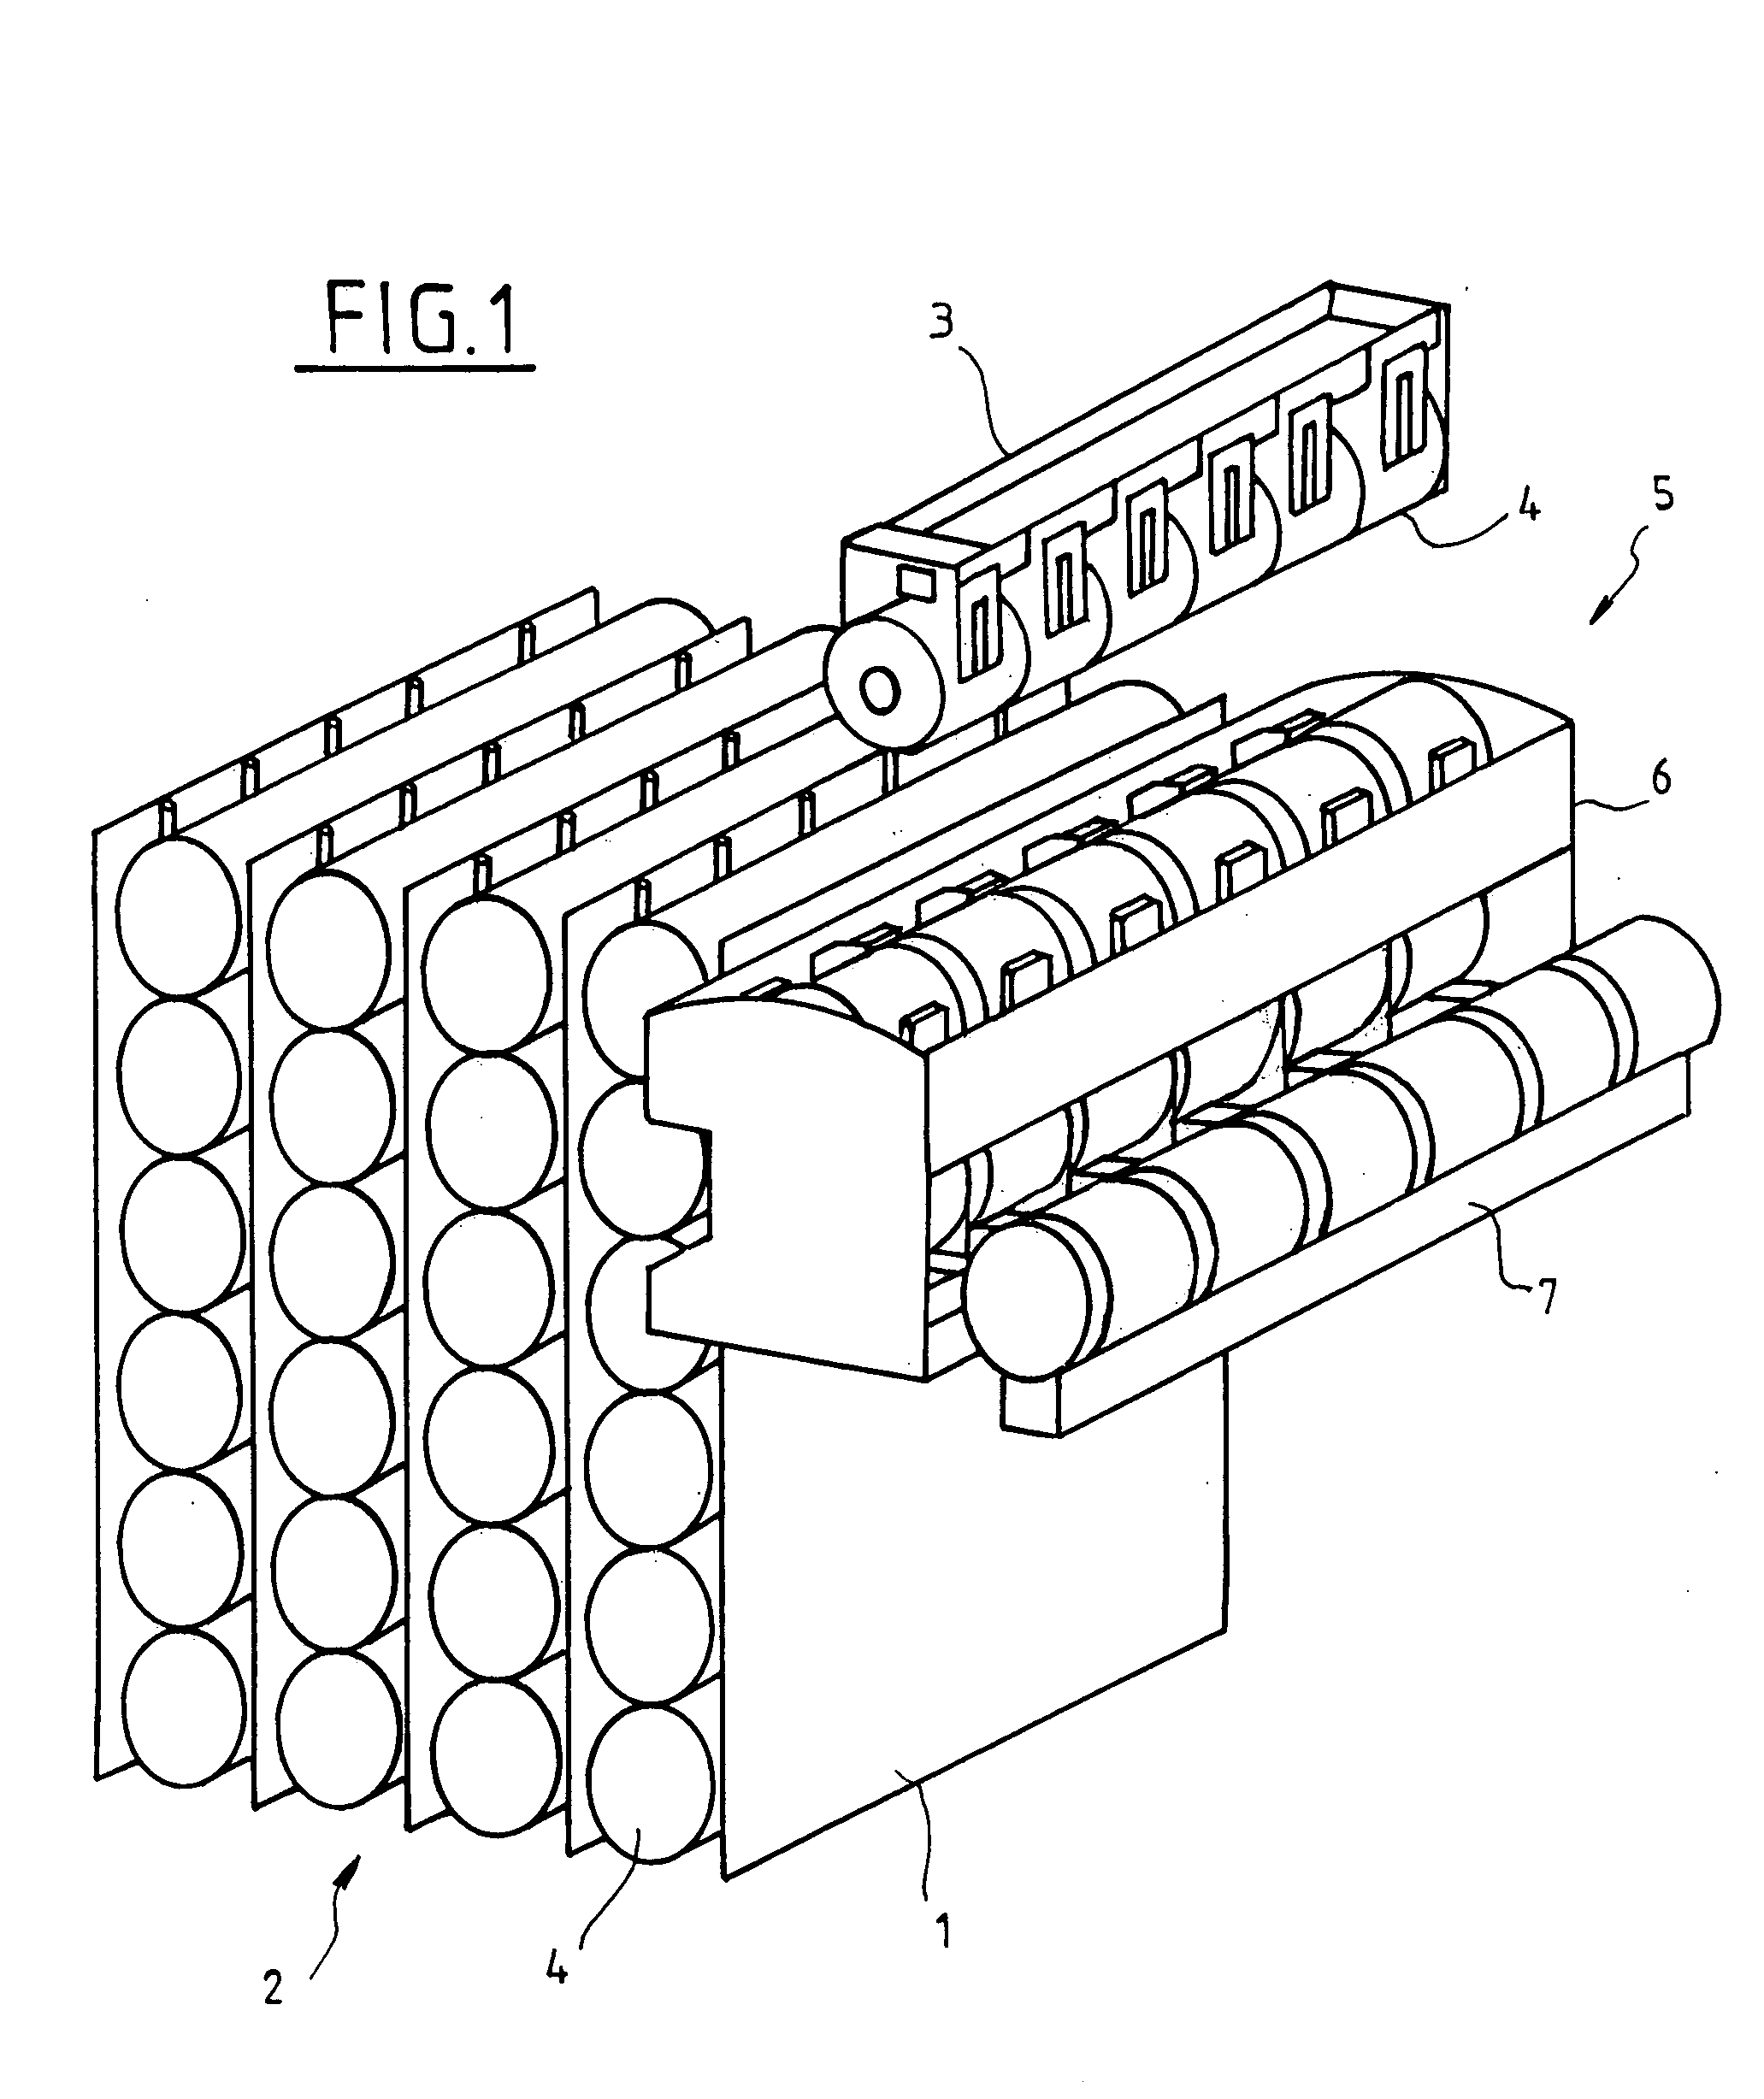 Device to separate propellant charge modules